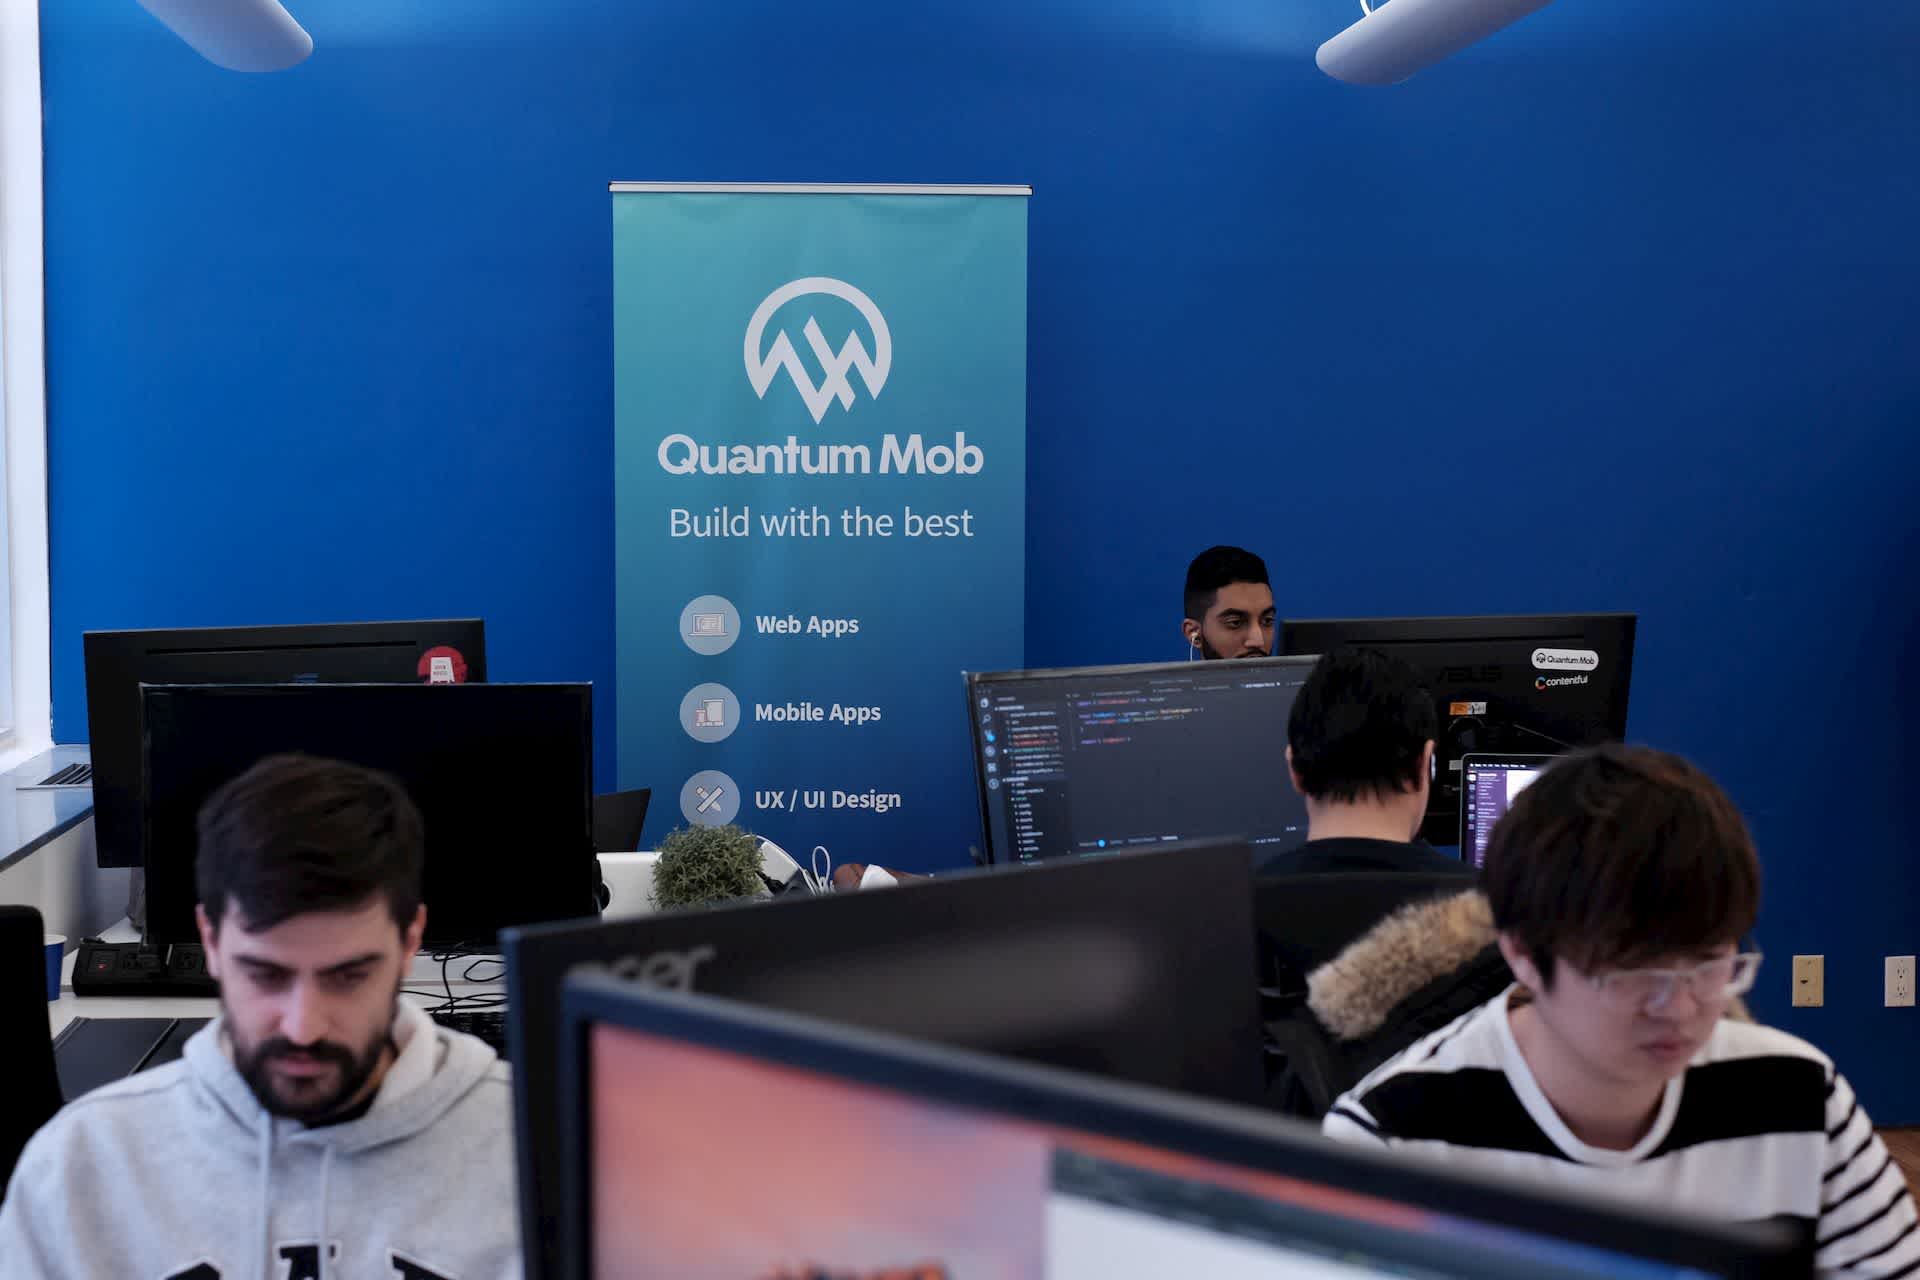 Quantum Mob staff working at computers